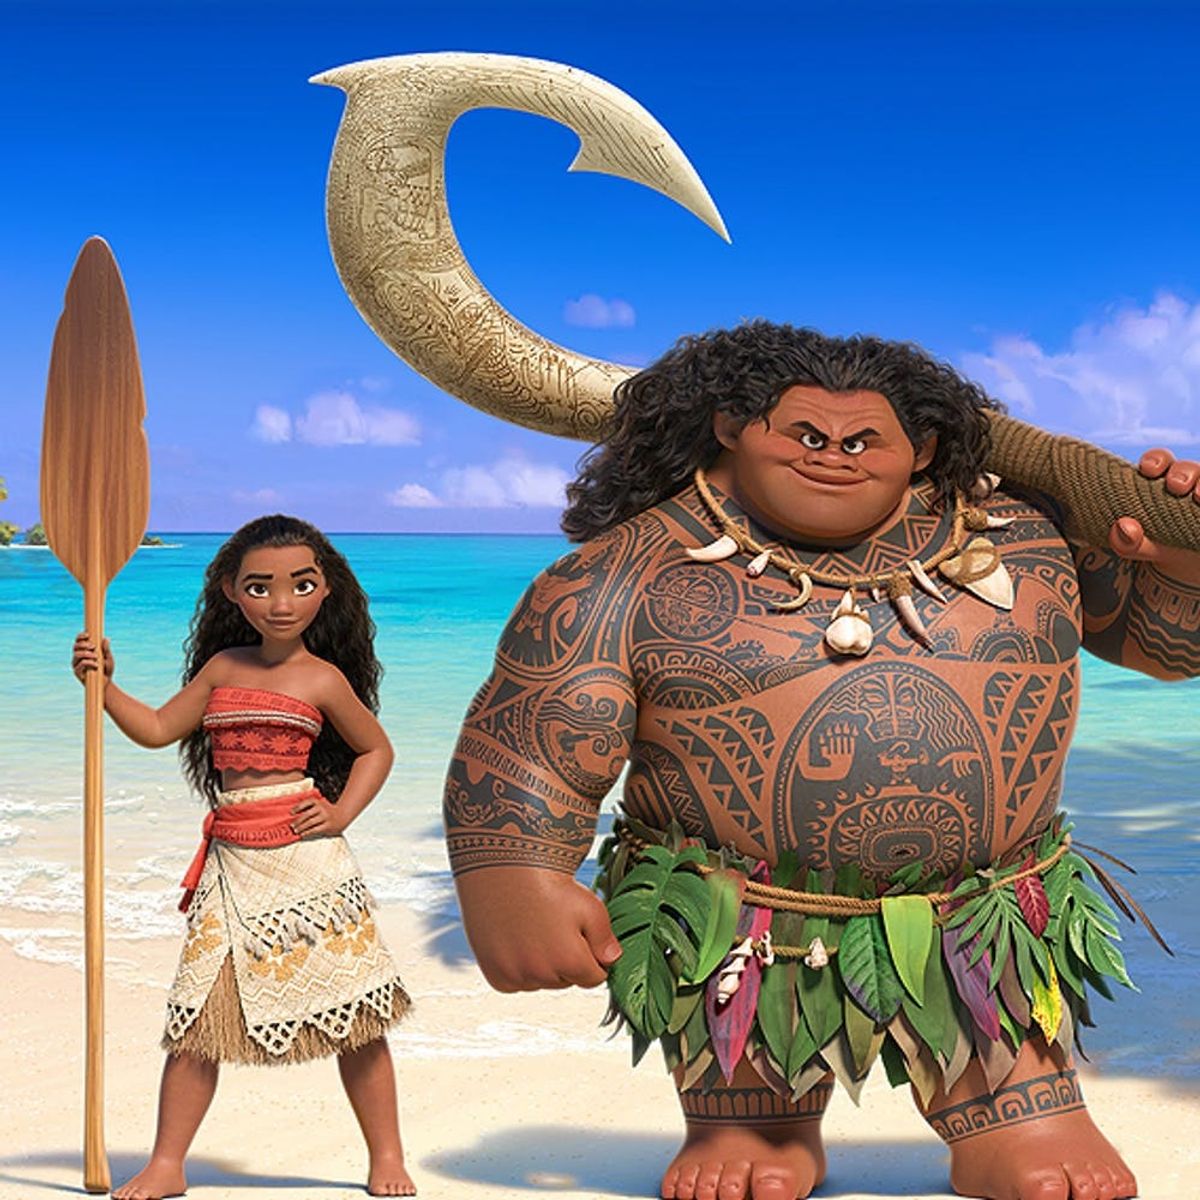 The Moana Soundtrack Is Going to Be Your Unexpected Holiday Listening Favorite